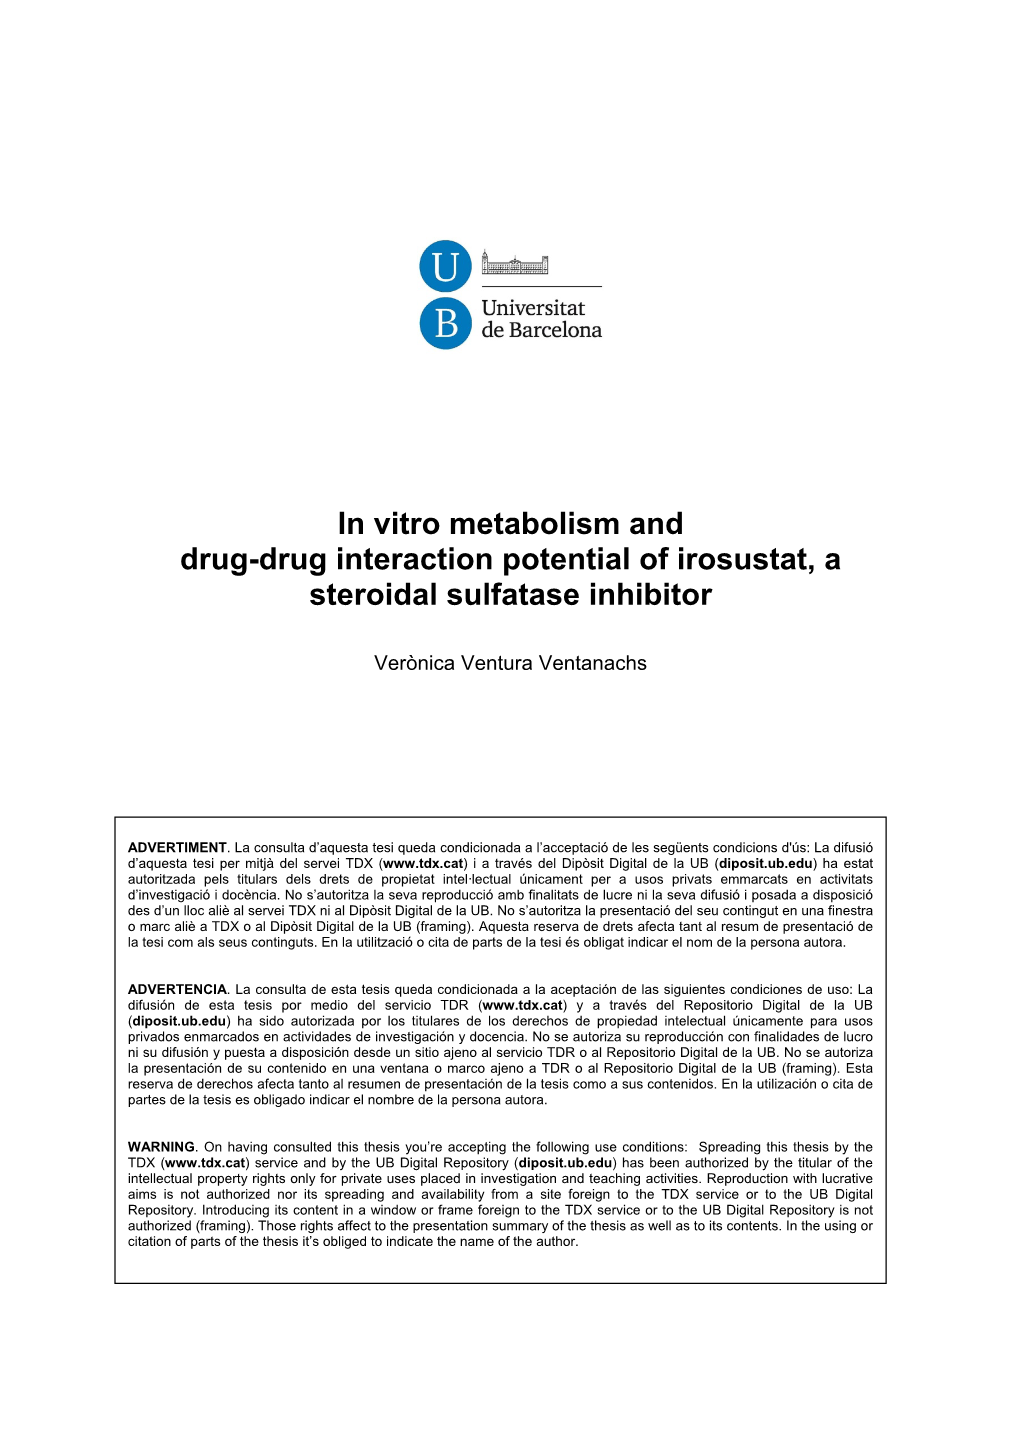 In Vitro Metabolism and Drug-Drug Interaction Potential of Irosustat, a Steroidal Sulfatase Inhibitor